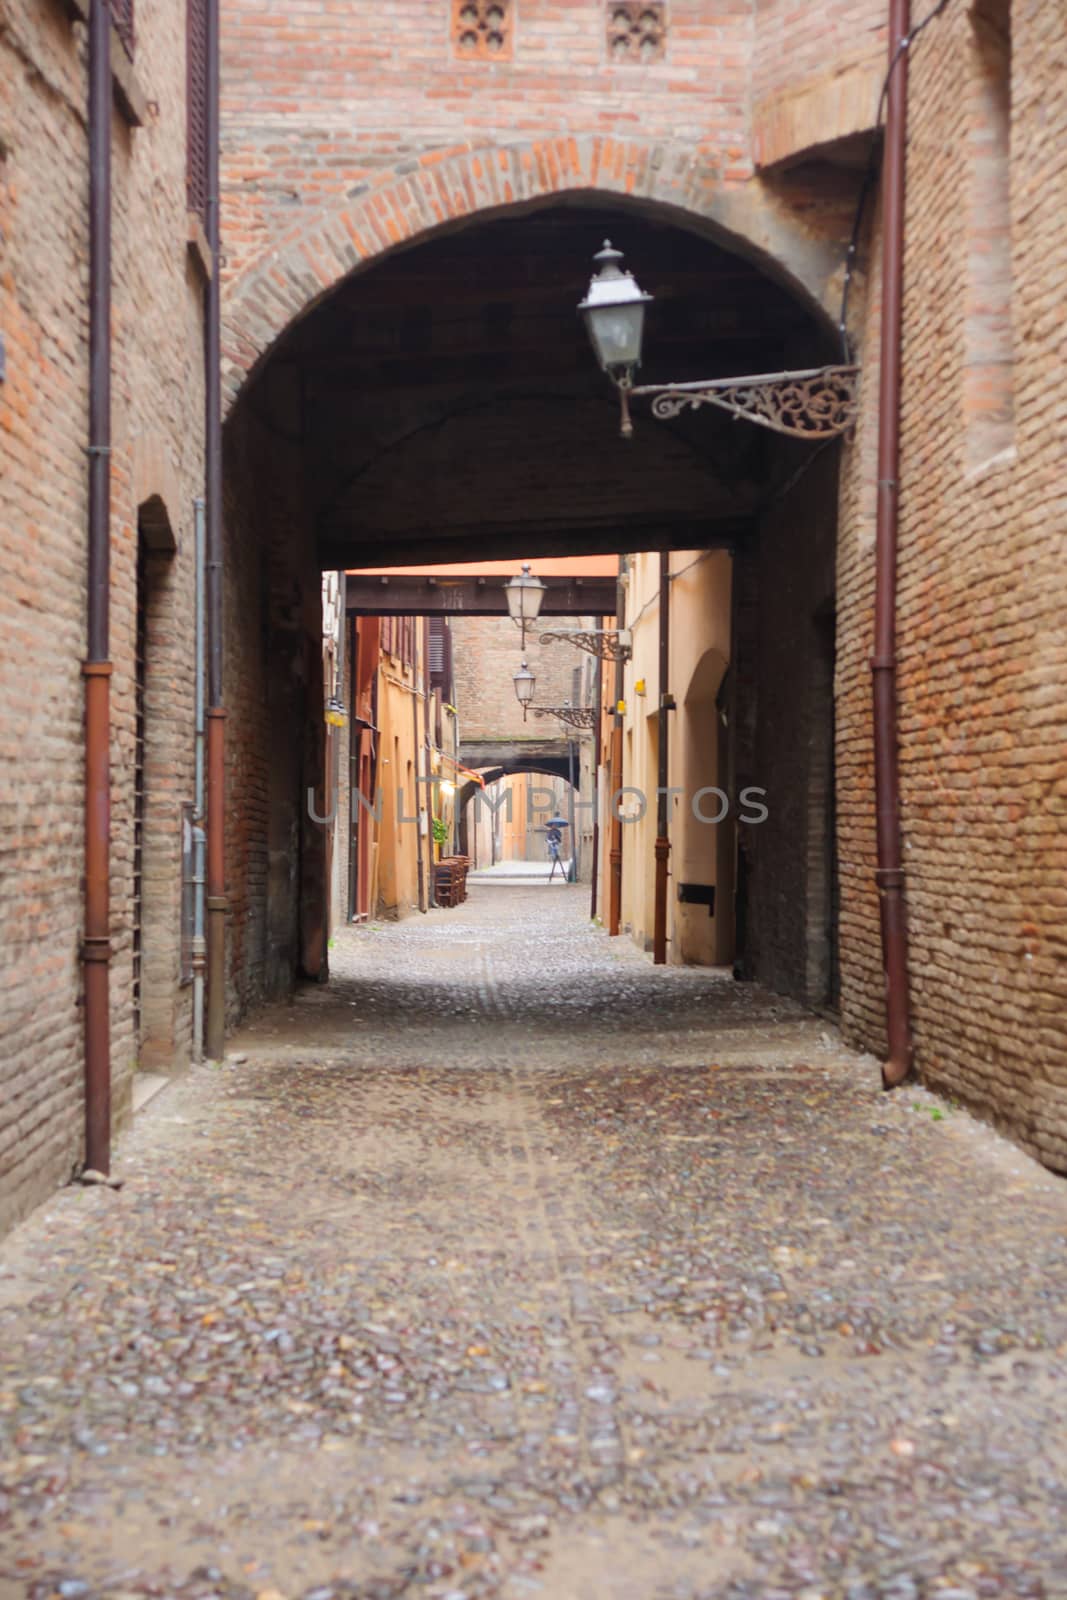 An alley in the old city of Ferrara, Emilia-Romagna, Italy